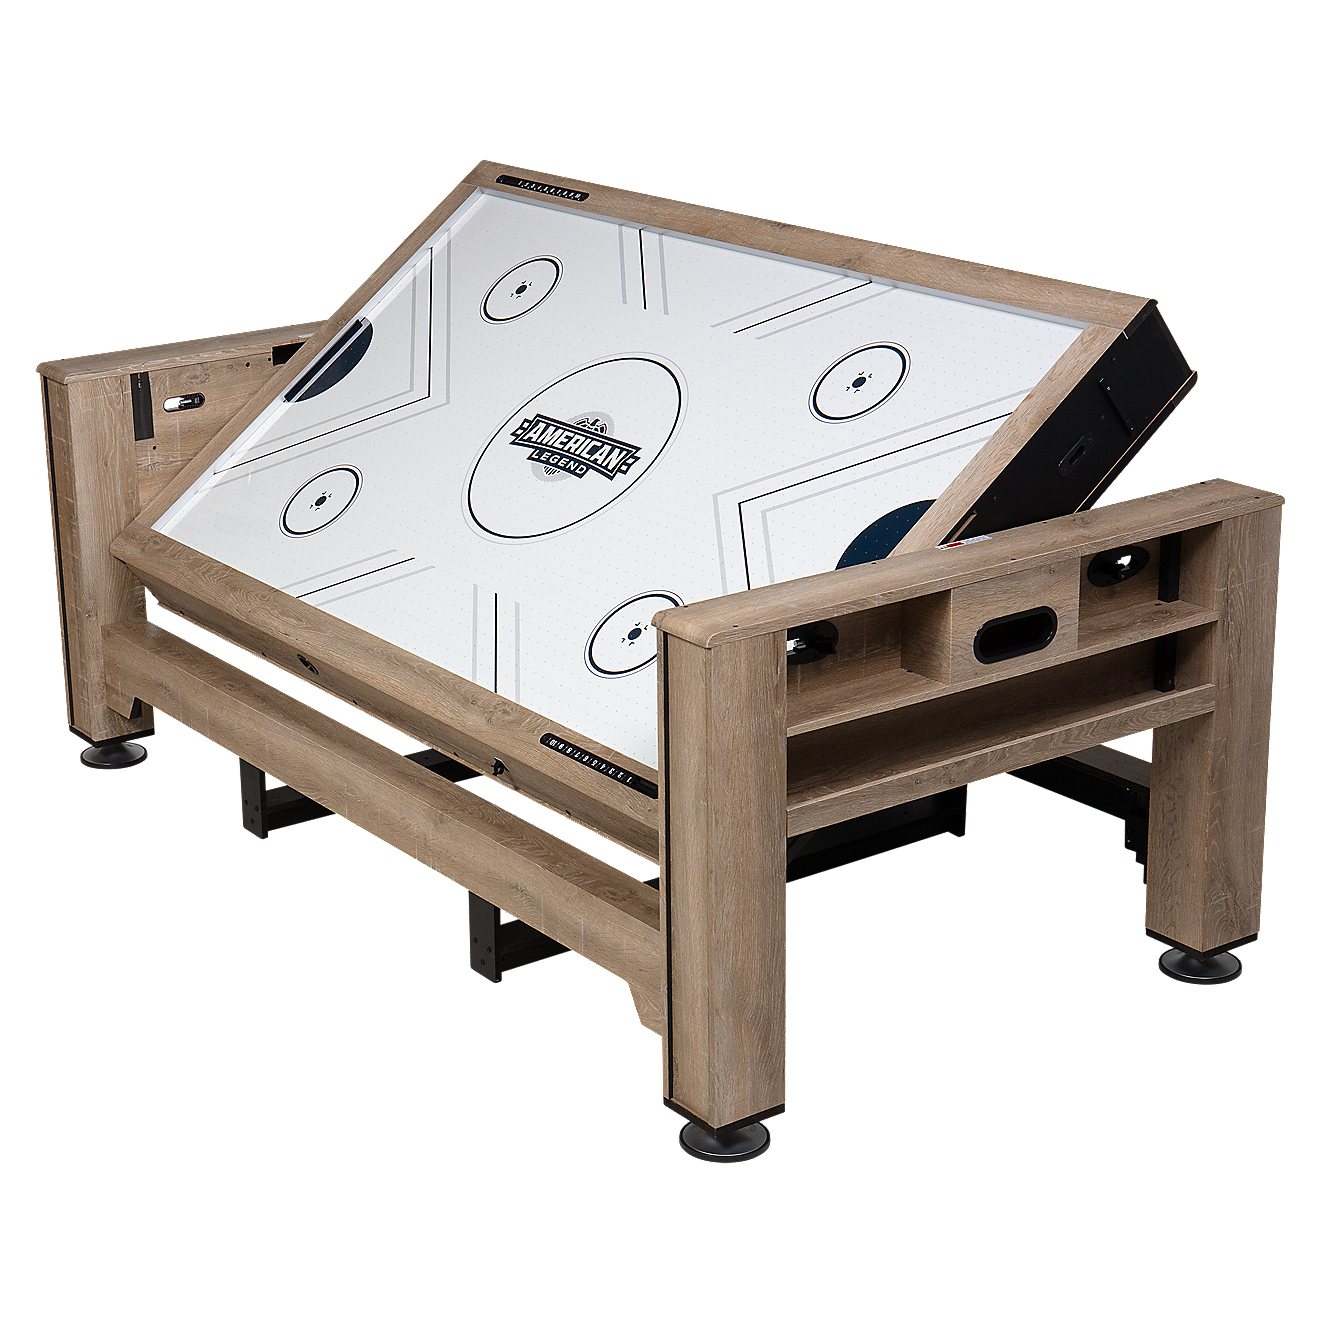 Multi game tables for adults Adult search pleasanton